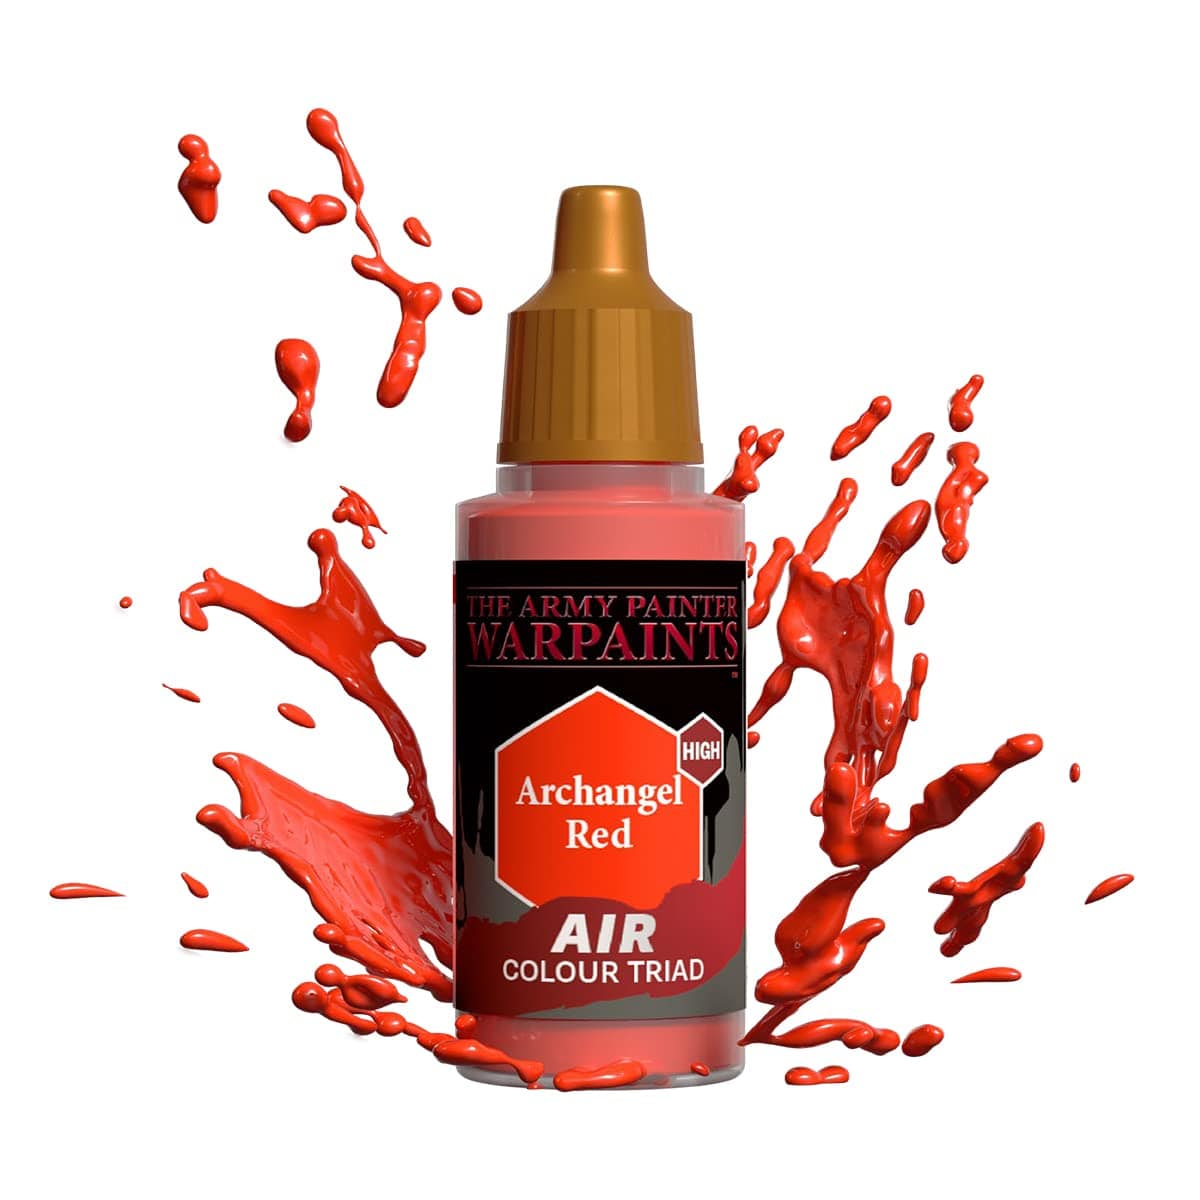 The Army Painter Accessories The Army Painter Warpaints Air: Archangel Red 18ml